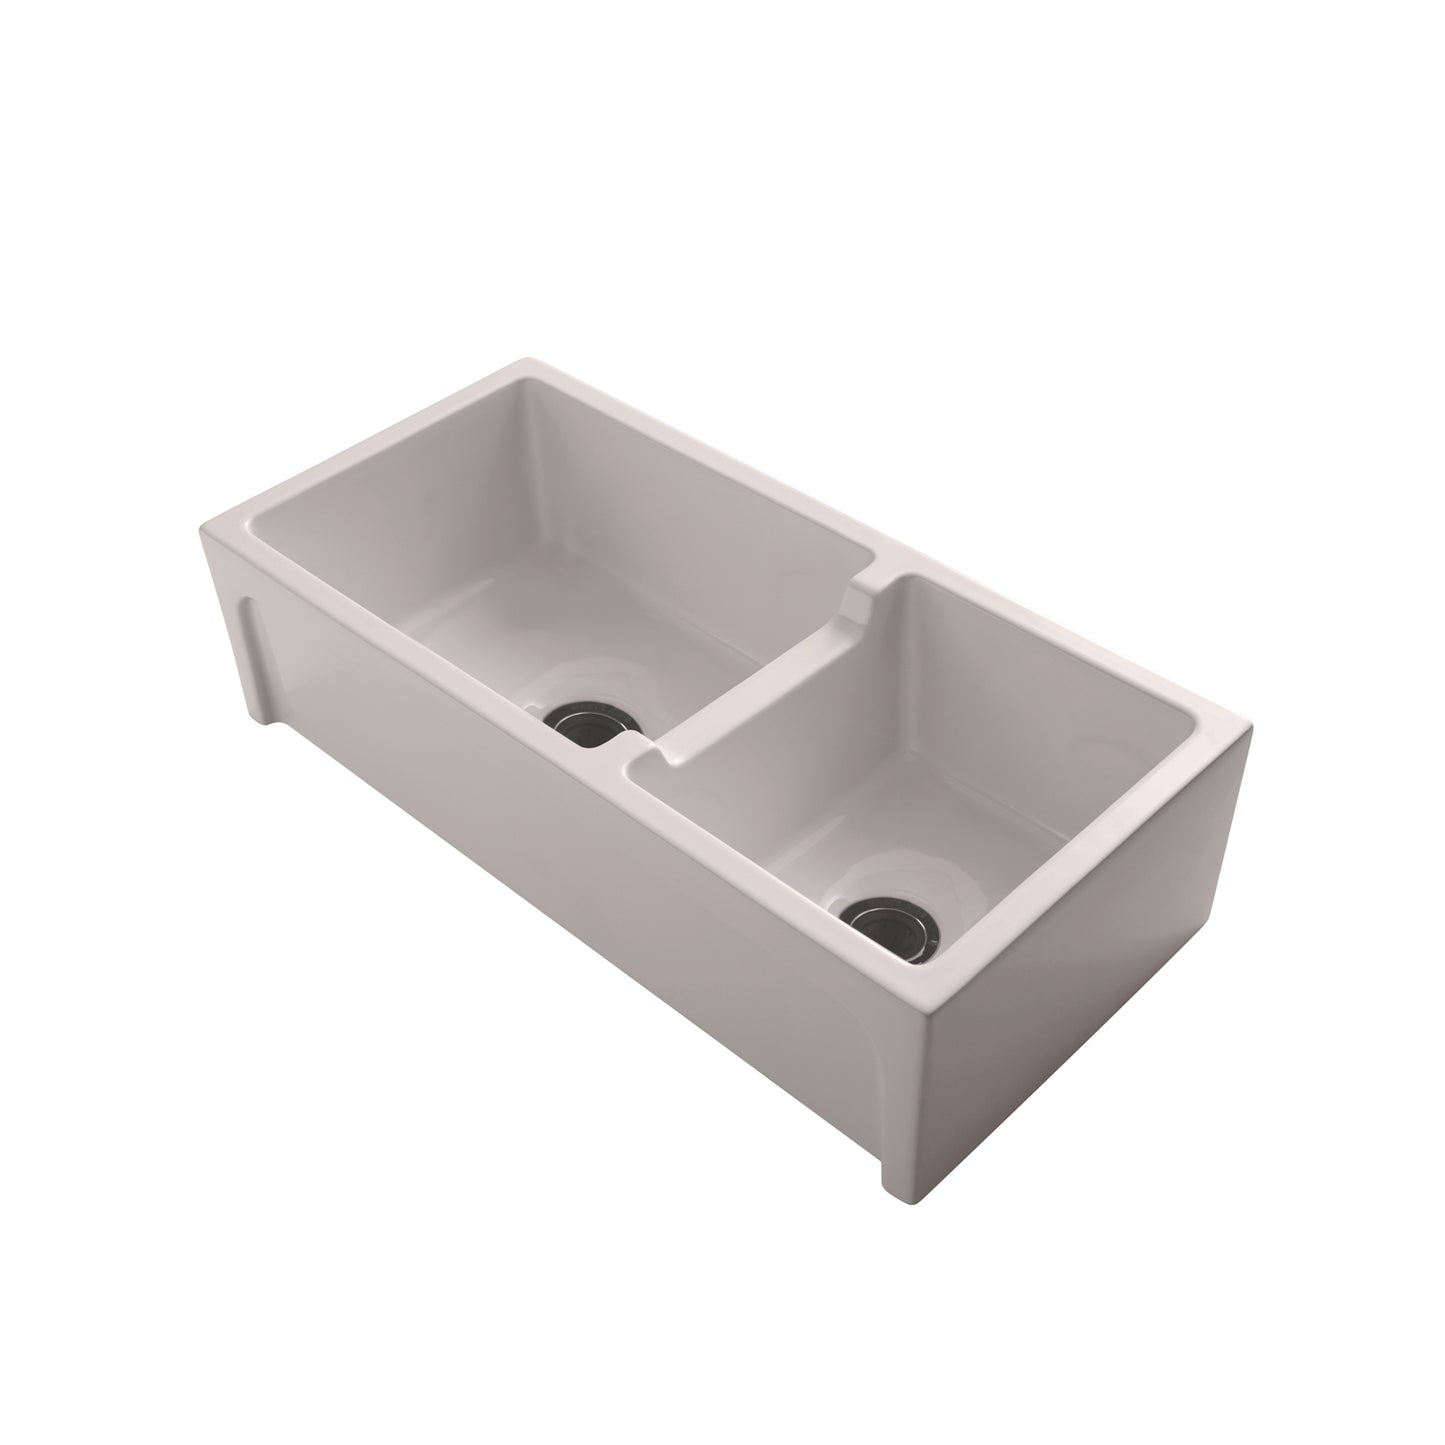 Millwood 36" Double Bowl Fireclay Apron Kitchen Sink Bisque Finish